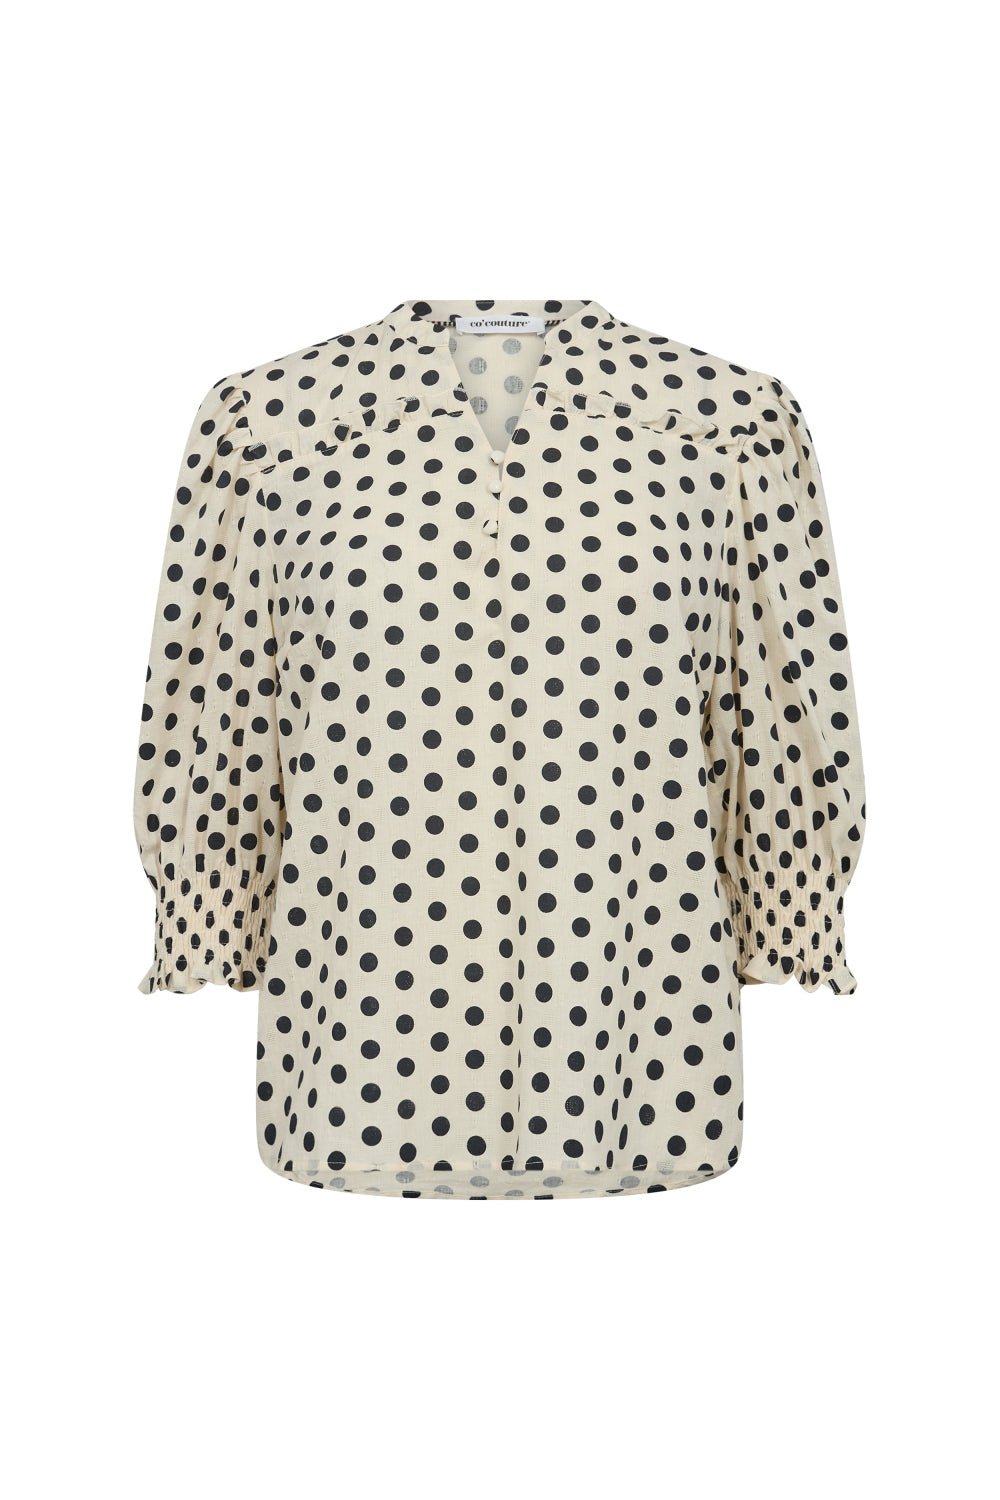 Co'Couture Davi Dot SS Blouse - Off White / Navy - RUM Amsterdam